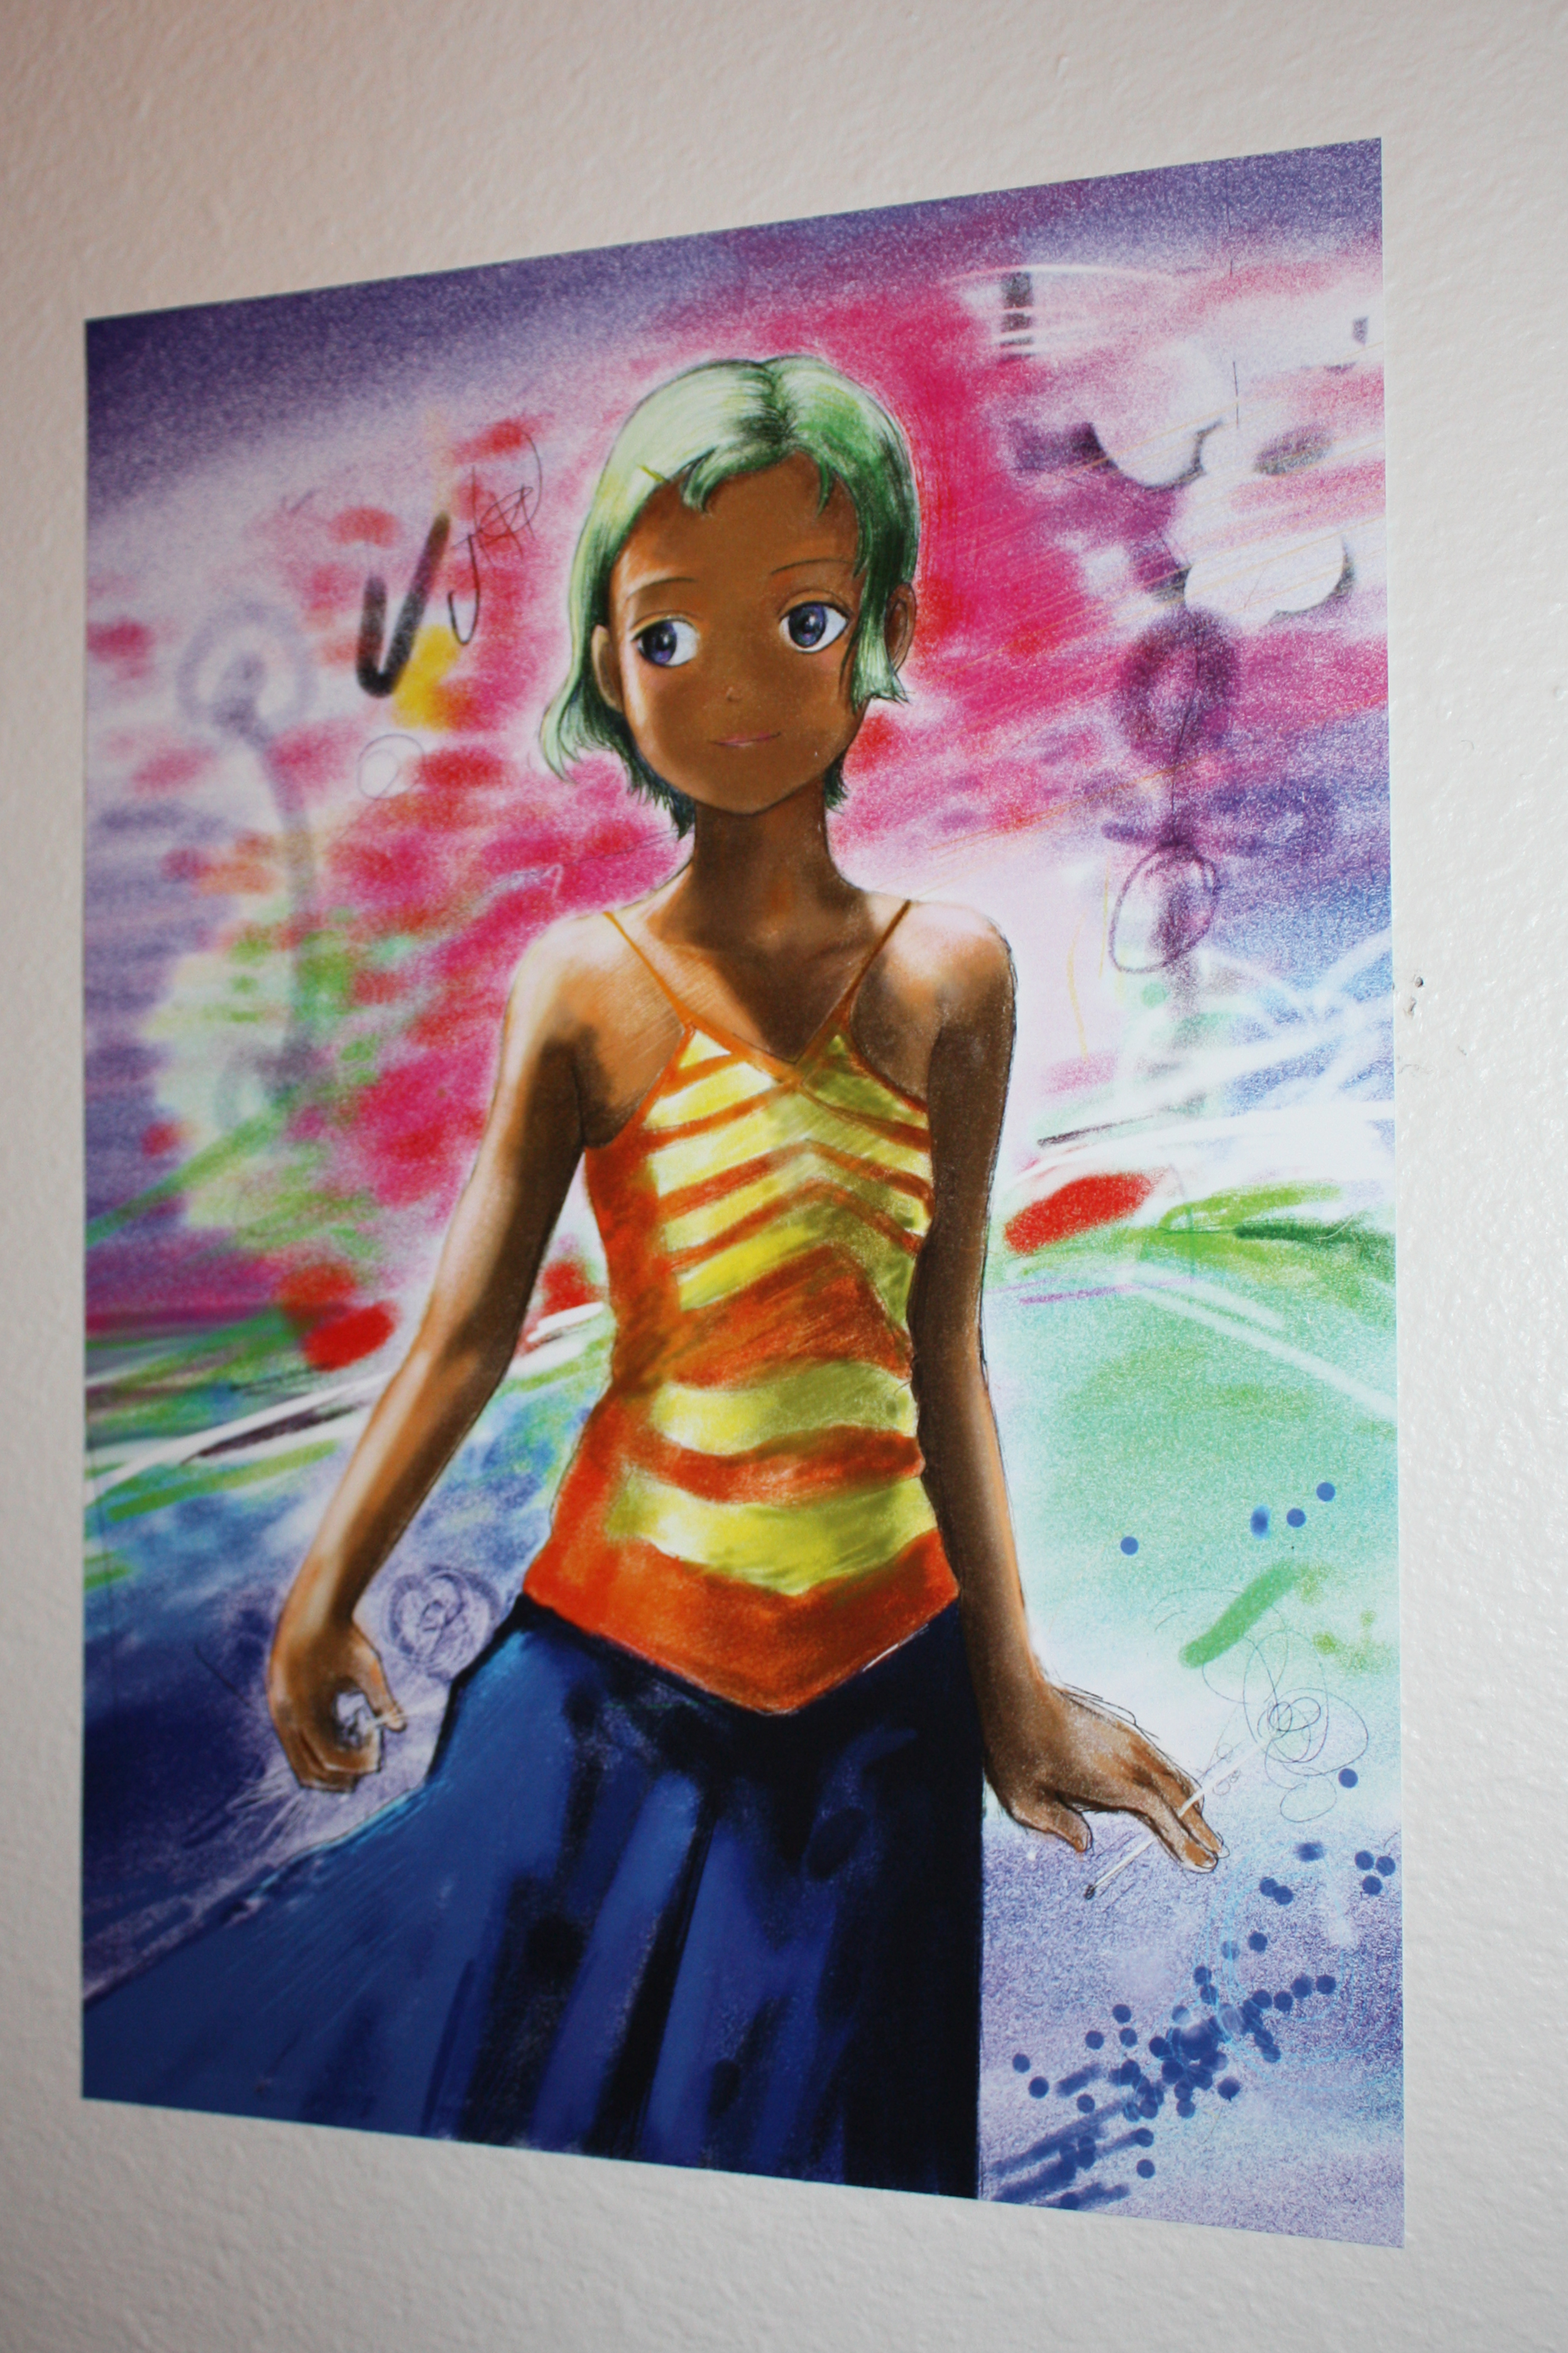 Detail of an anime girl with green hair and a dress hung on a white wall